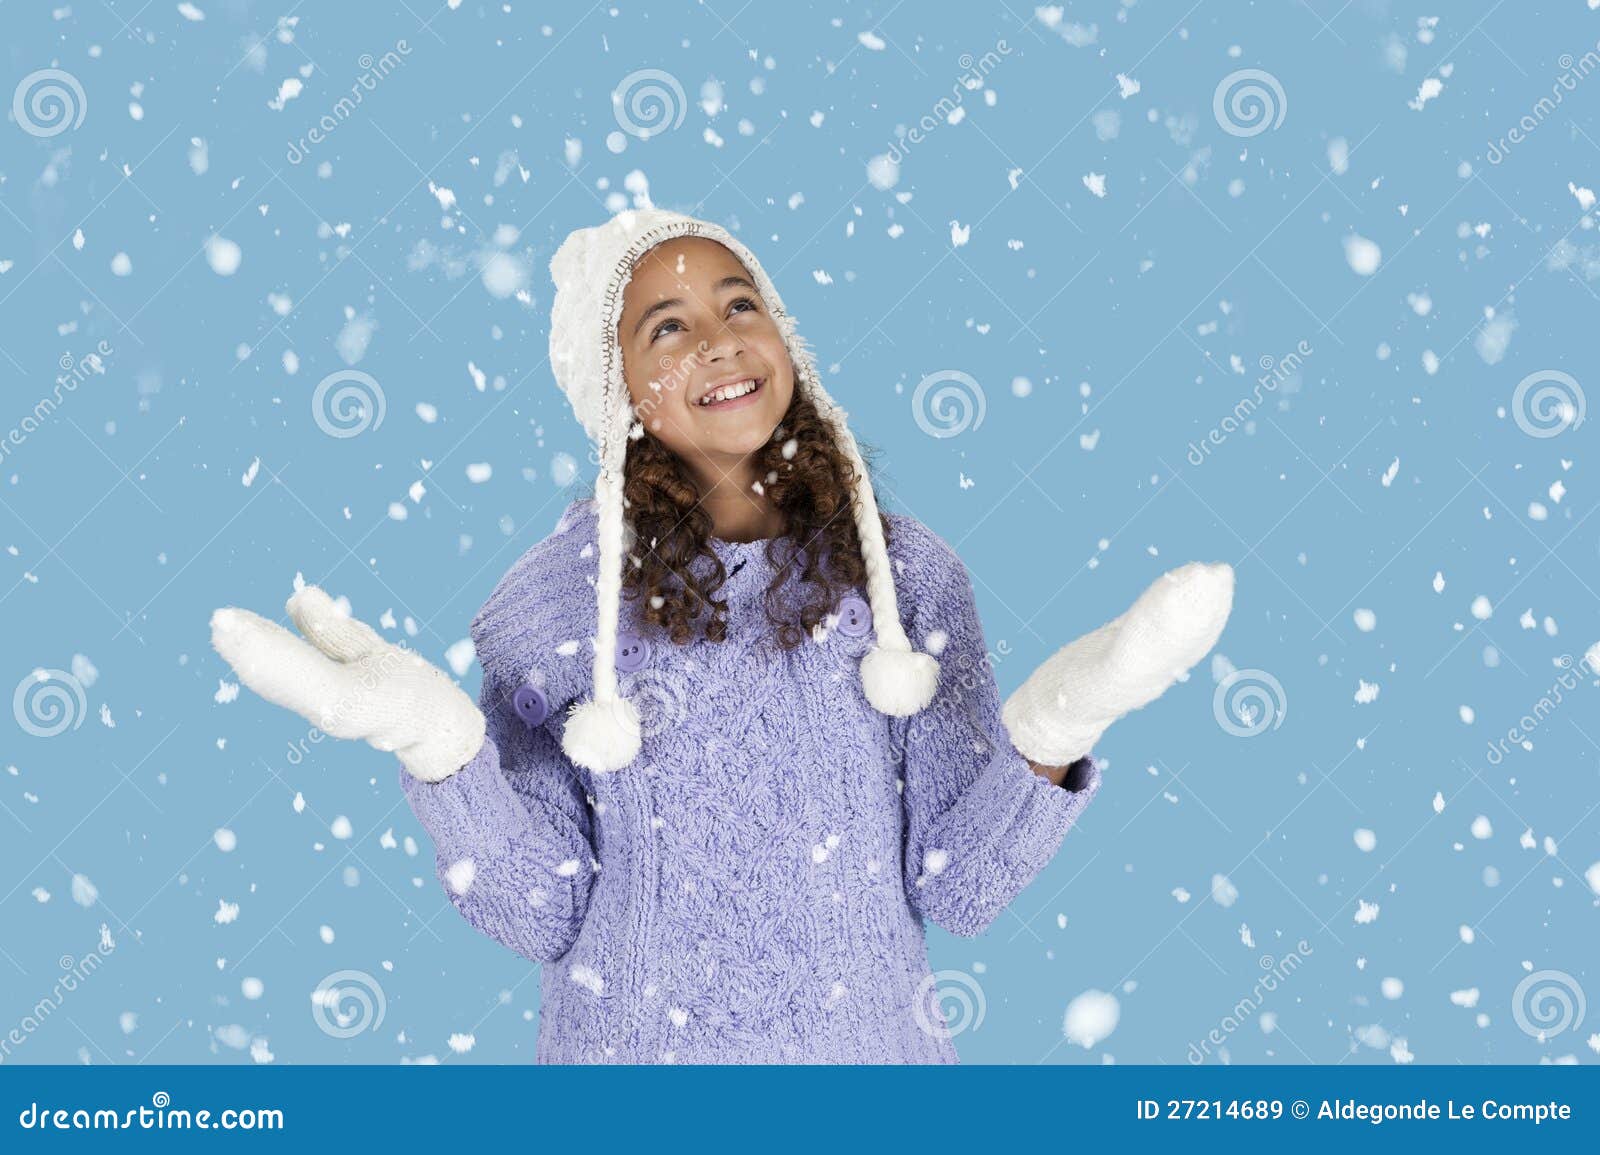 Snowing on Girl with Winter Hat and Gloves, Stock Image - Image of ...